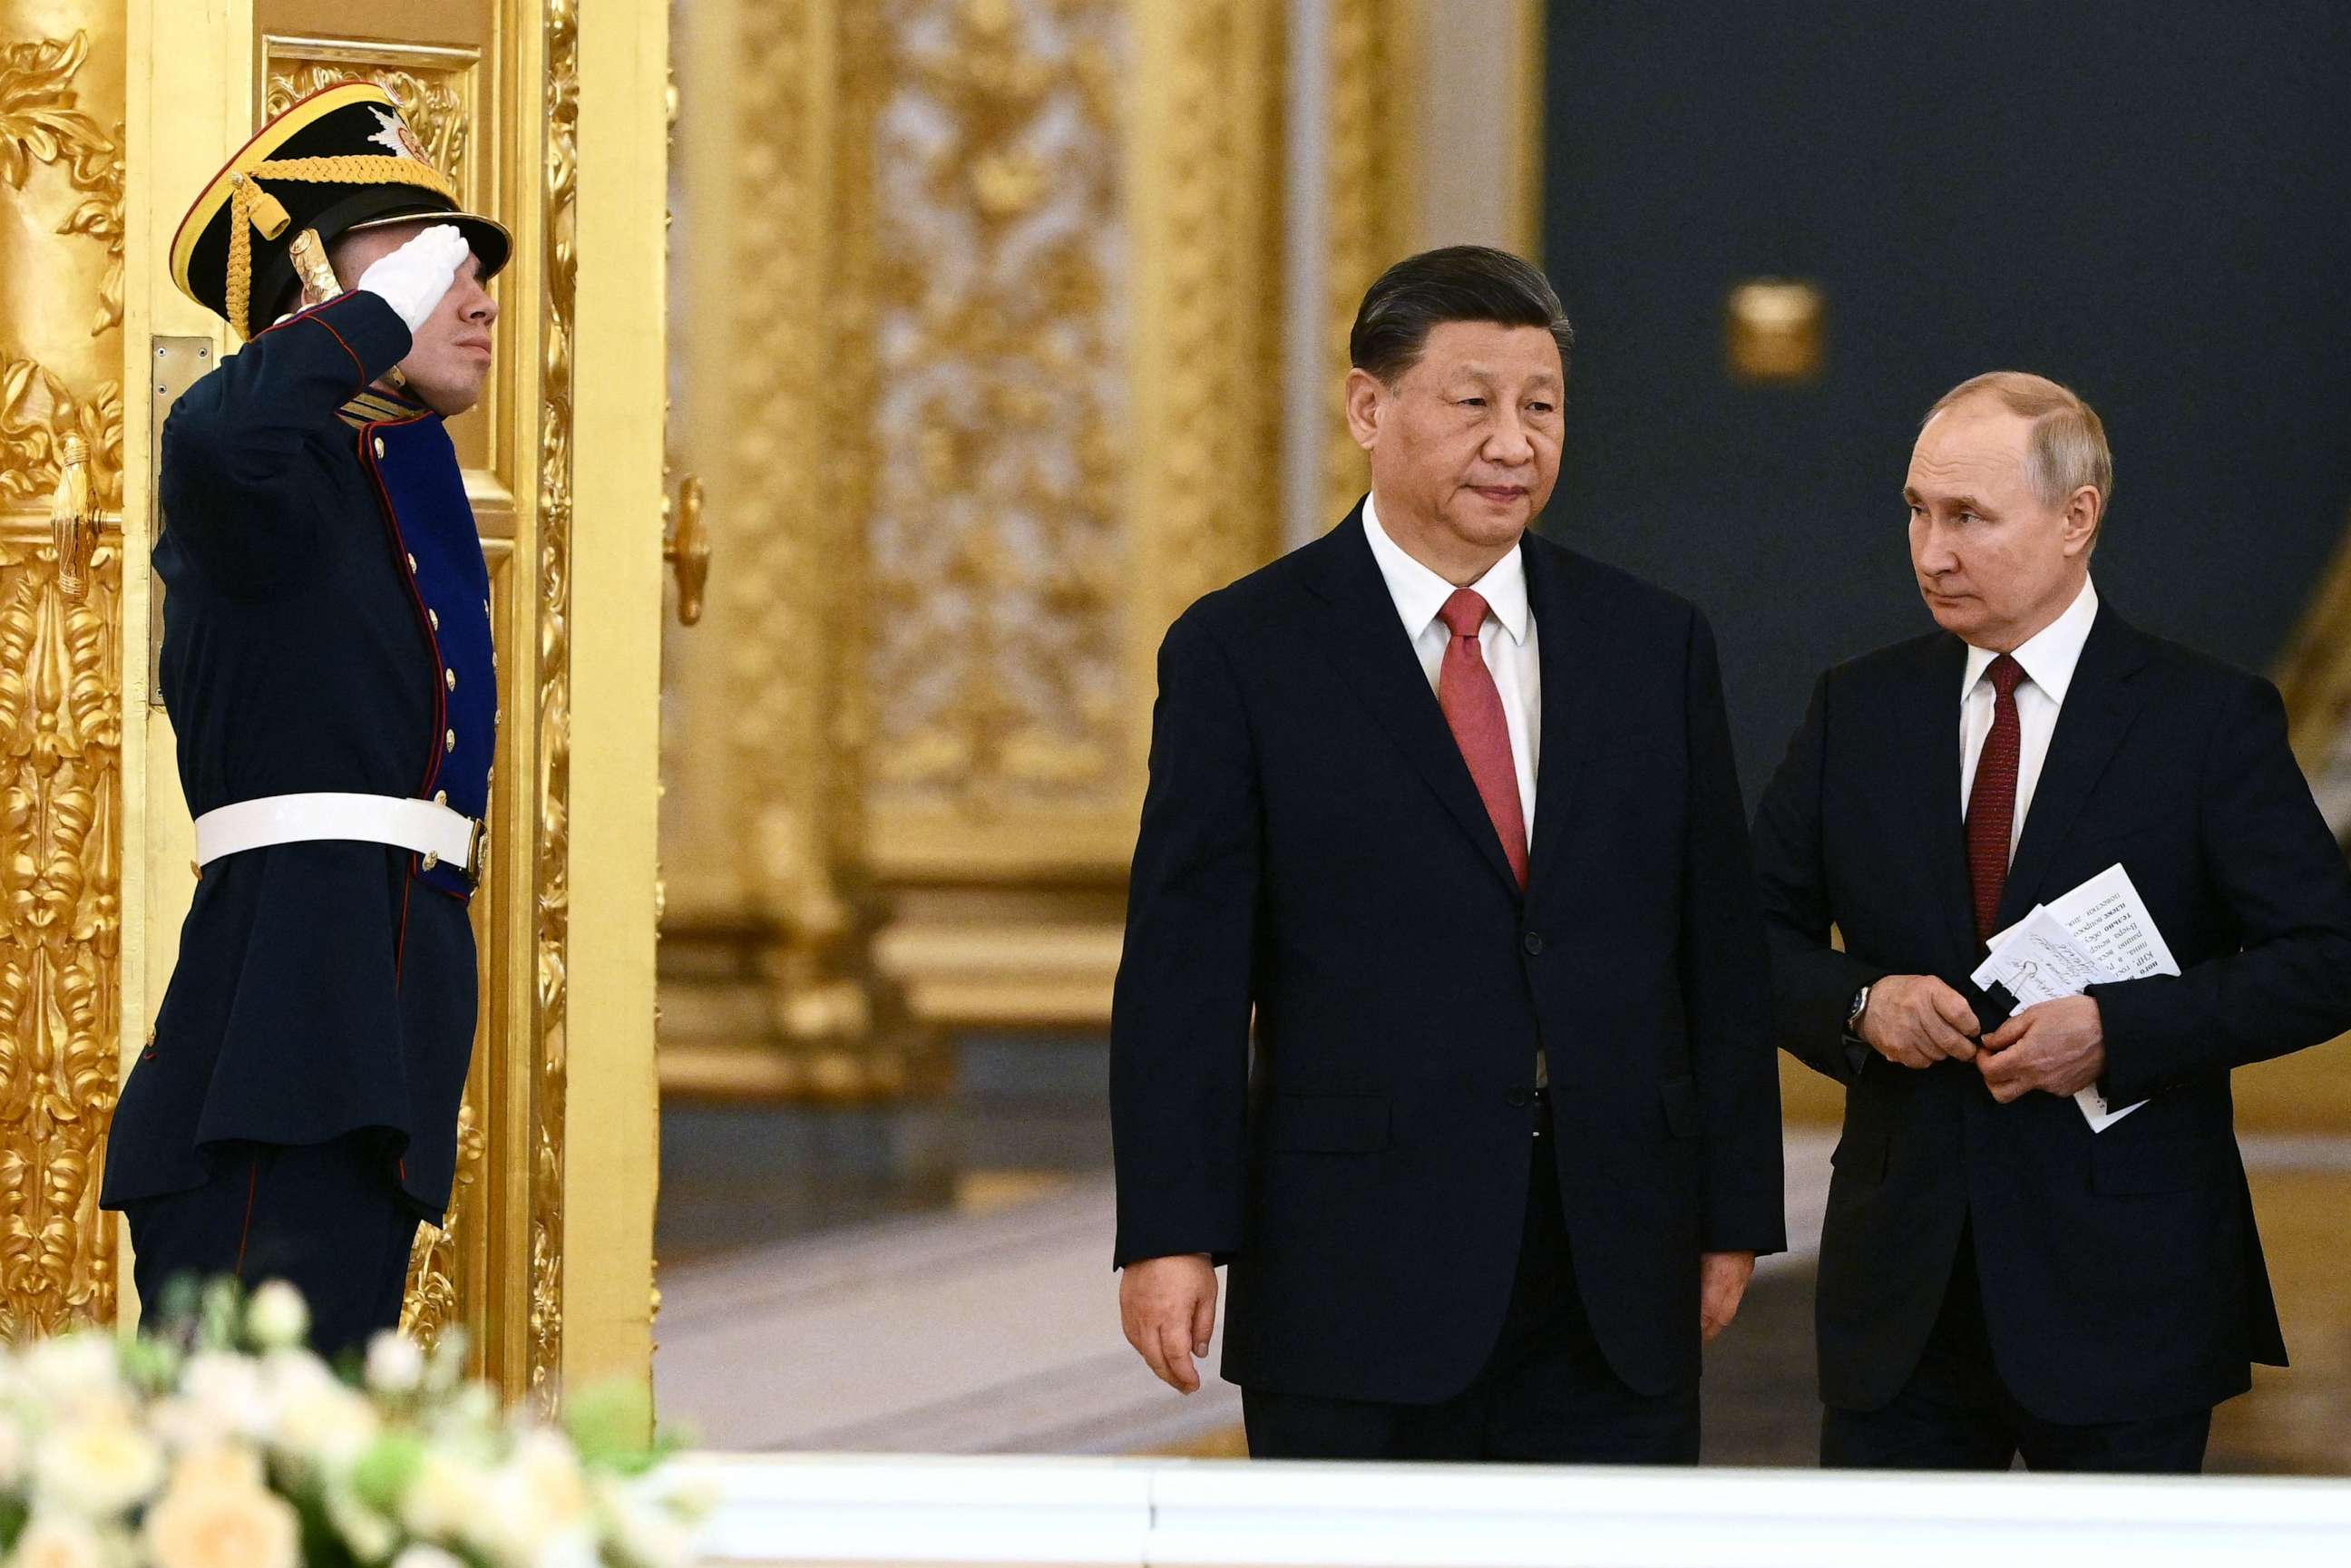 PHOTO: Russian President Vladimir Putin and China's President Xi Jinping enter a hall during a meeting at the Kremlin in Moscow on March 21, 2023.